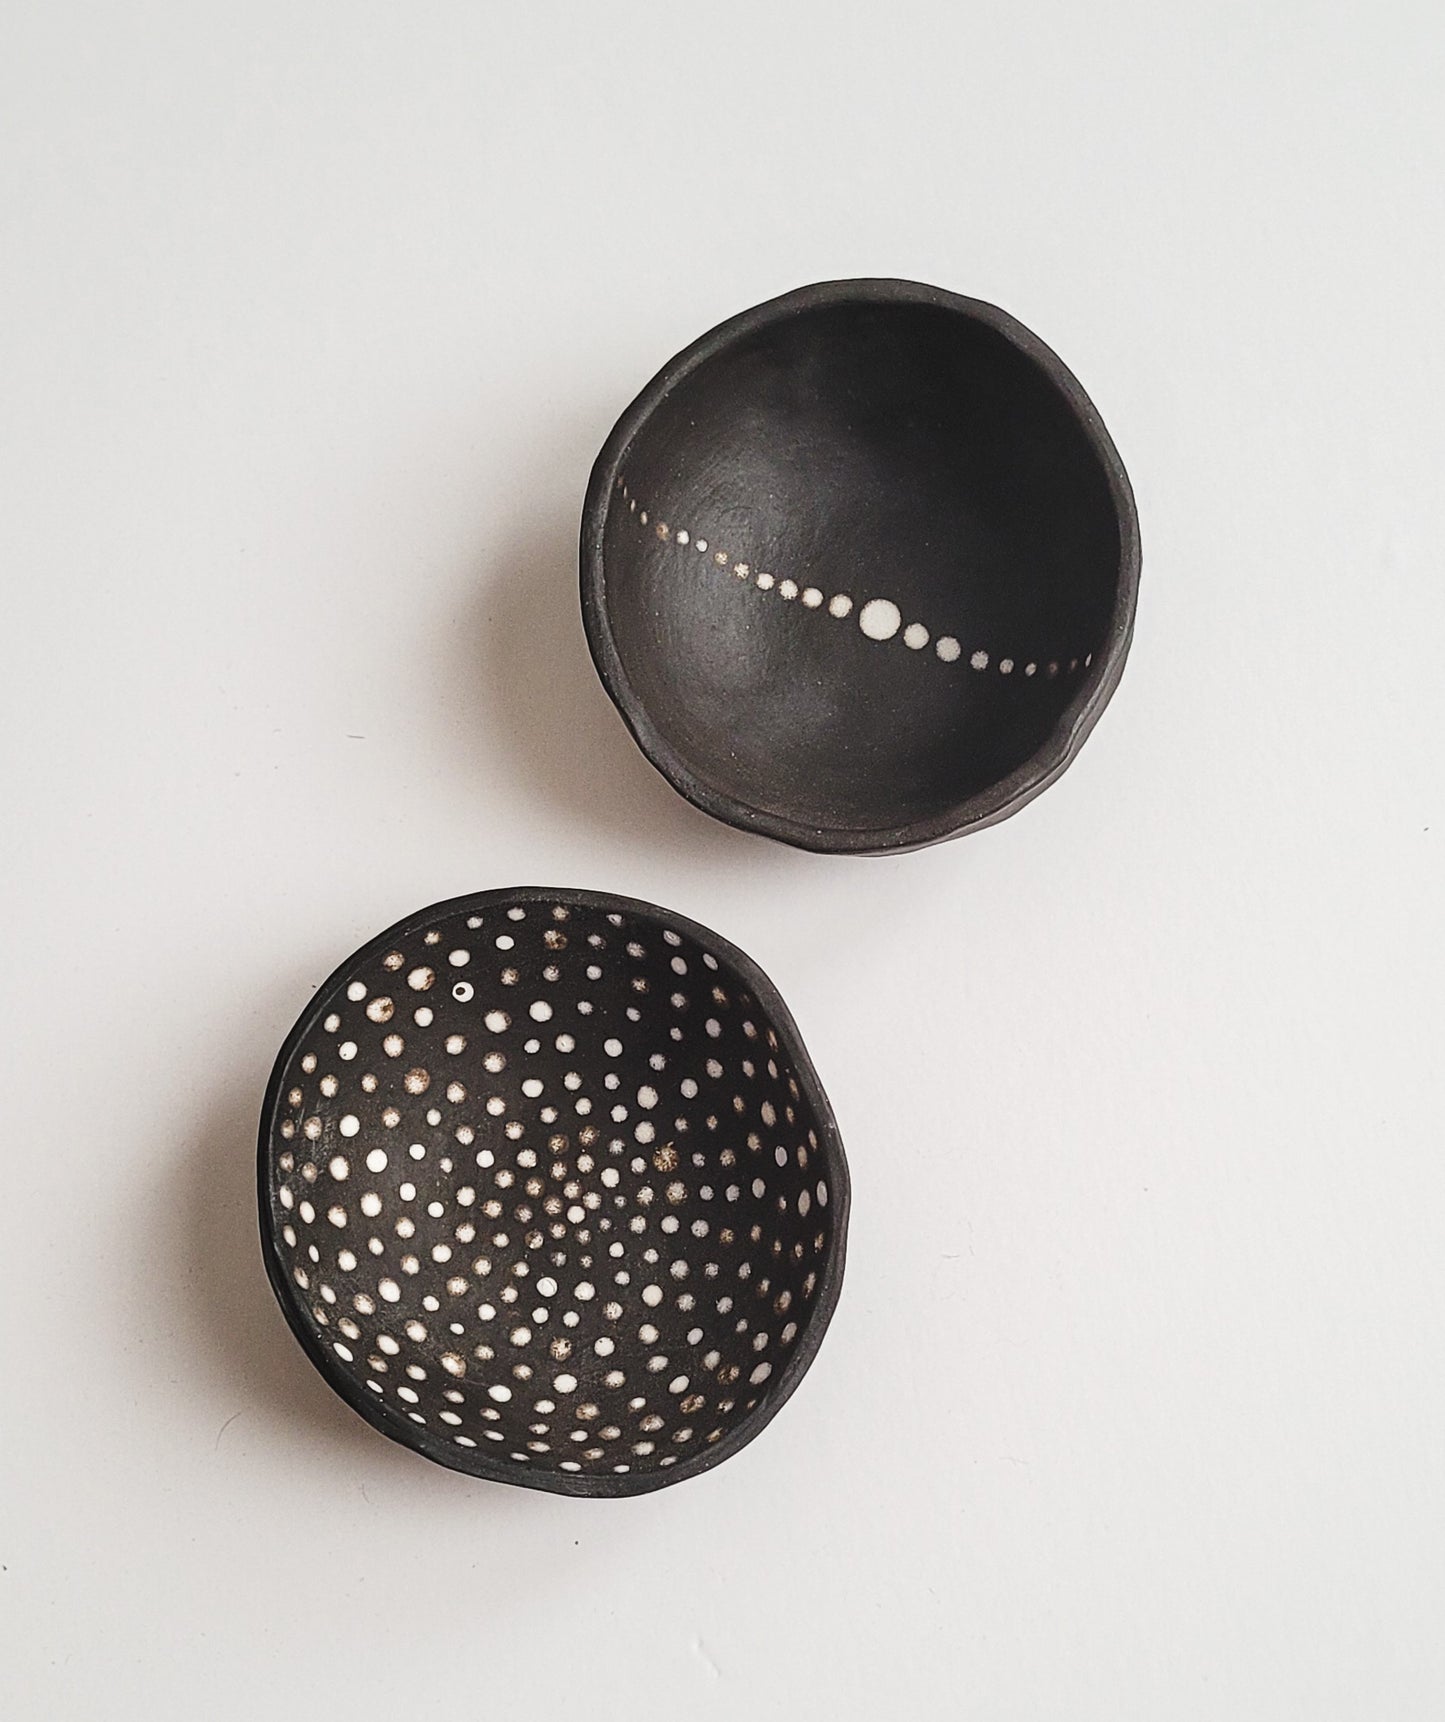 Small Black Clay Nesting Bowls by Jessica Ayala - Set of 2